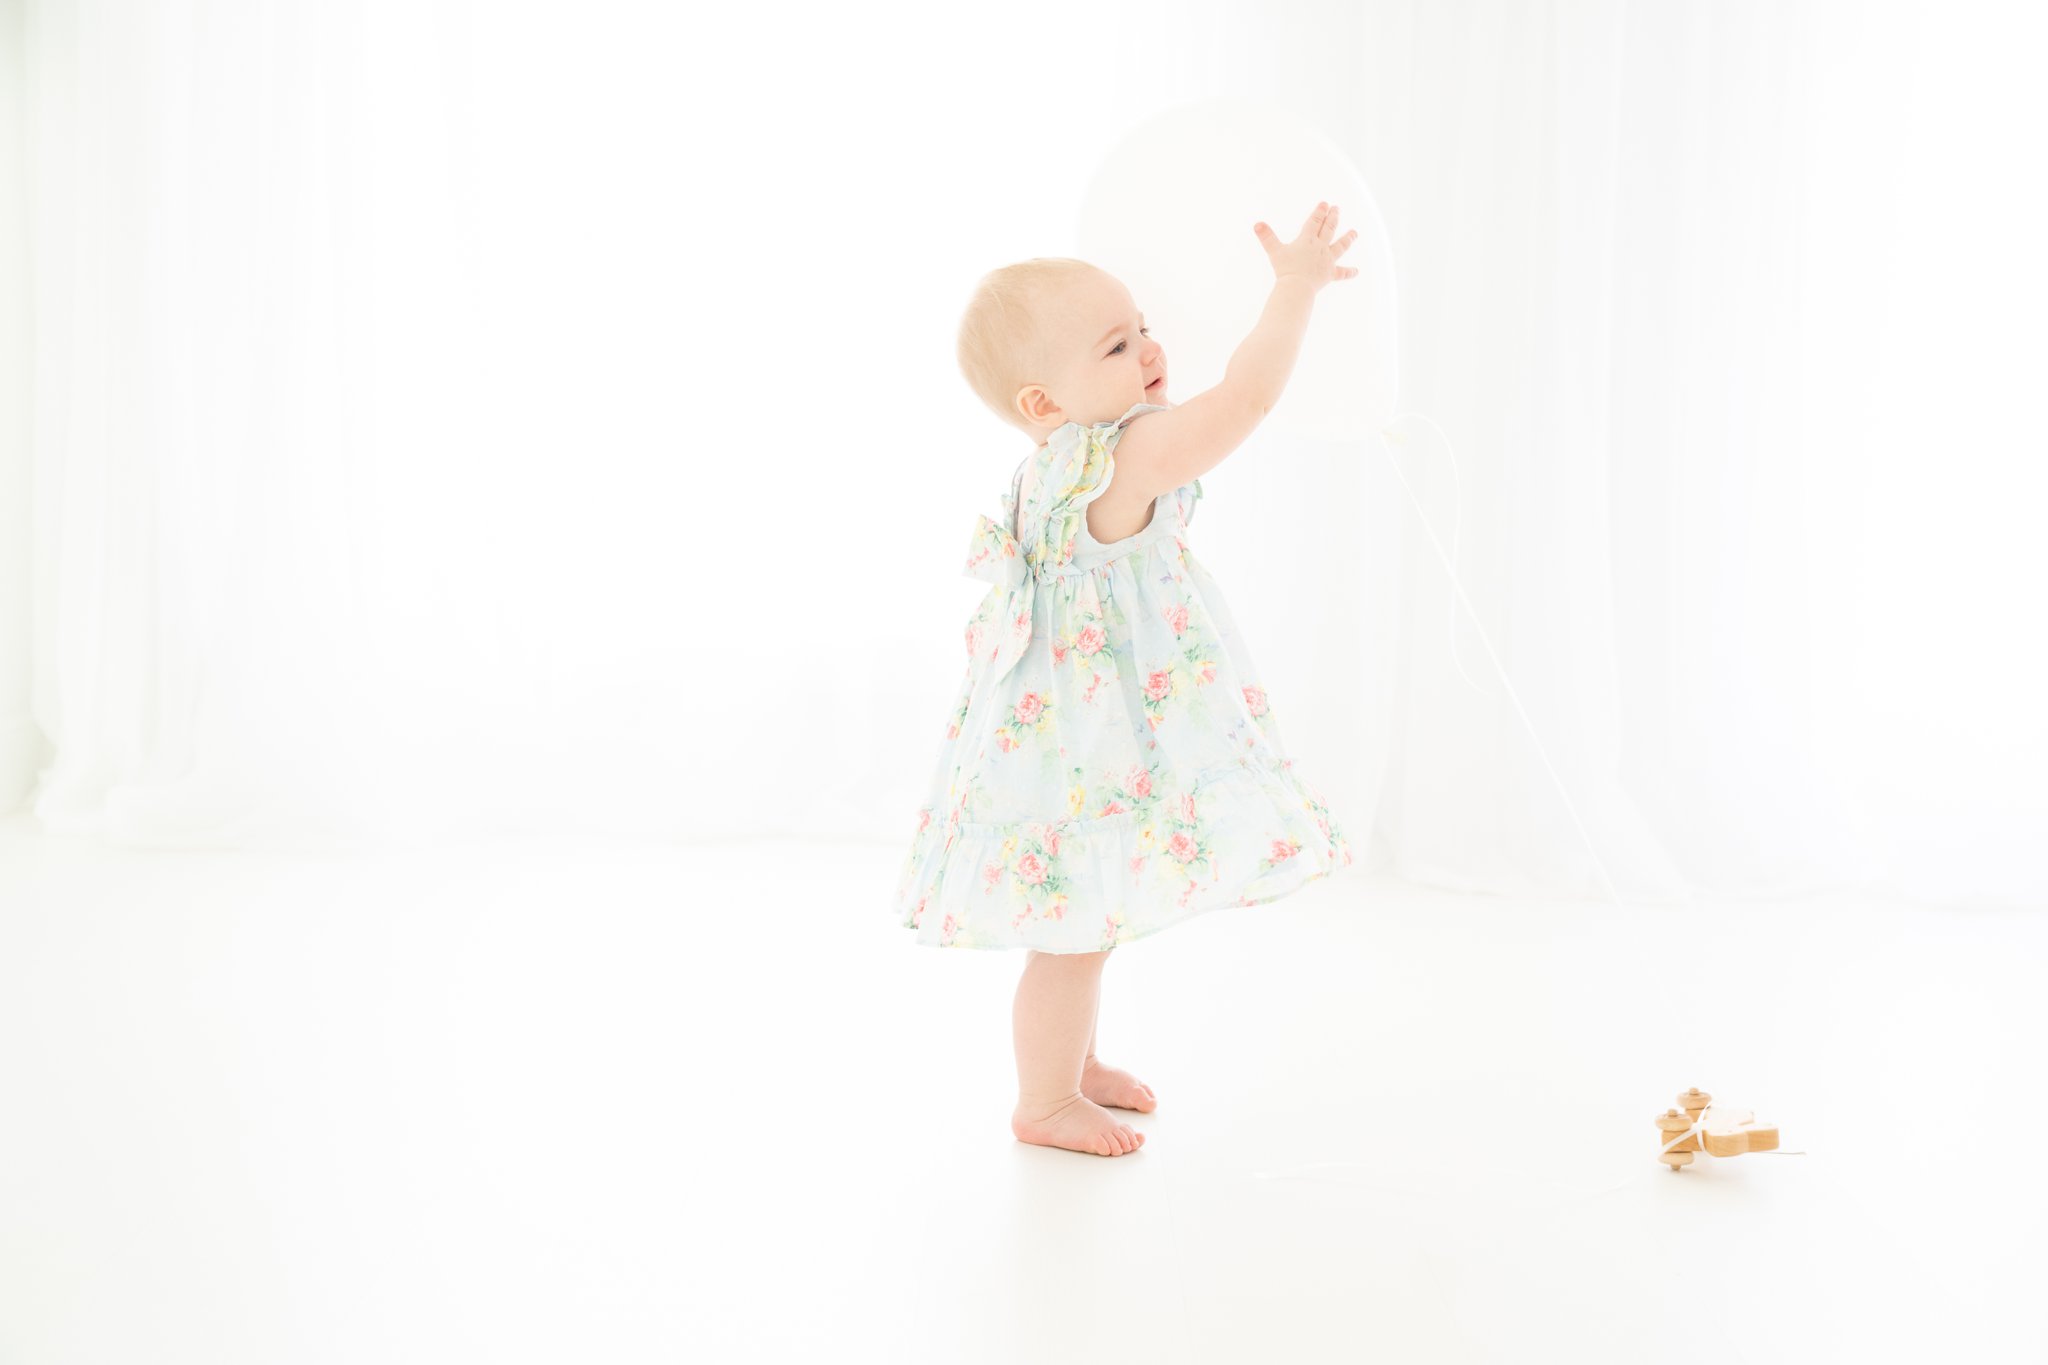 baby in a pretty blue dress playing with a single white birthday balloon